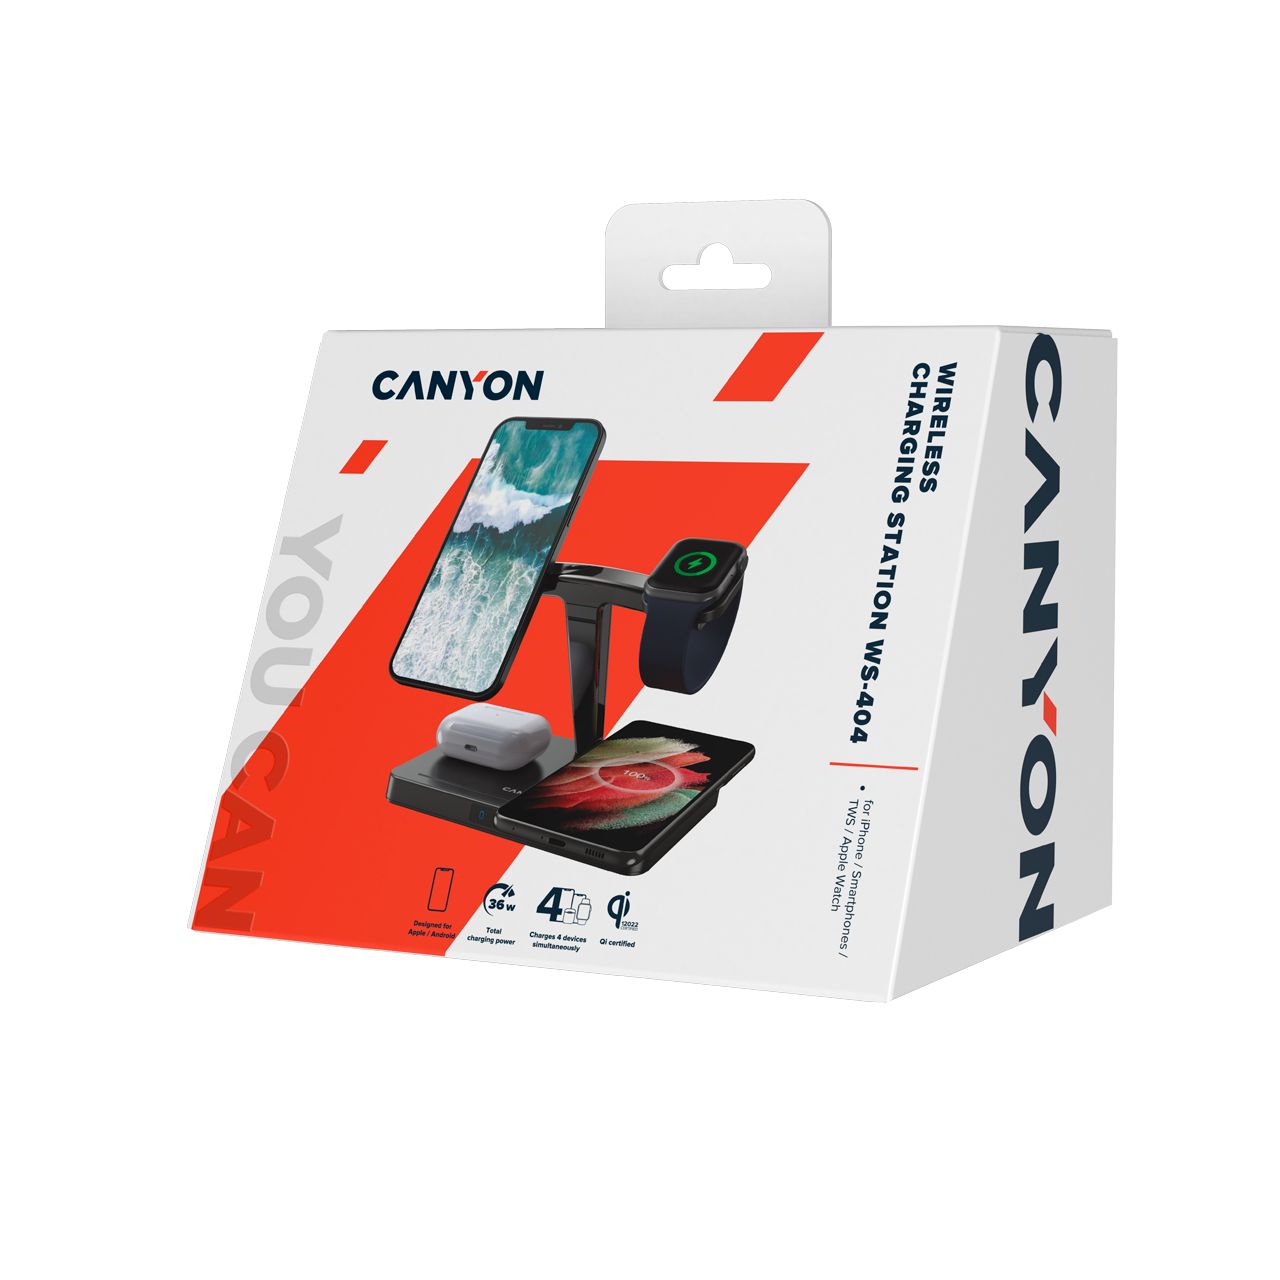 CANYON WS-404 4in1 Wireless charger, with input 12V3A DC Eu adapter , Output 15W/10W/7.5W/5W, 161*105*138mm, 0.510Kg, Black_2